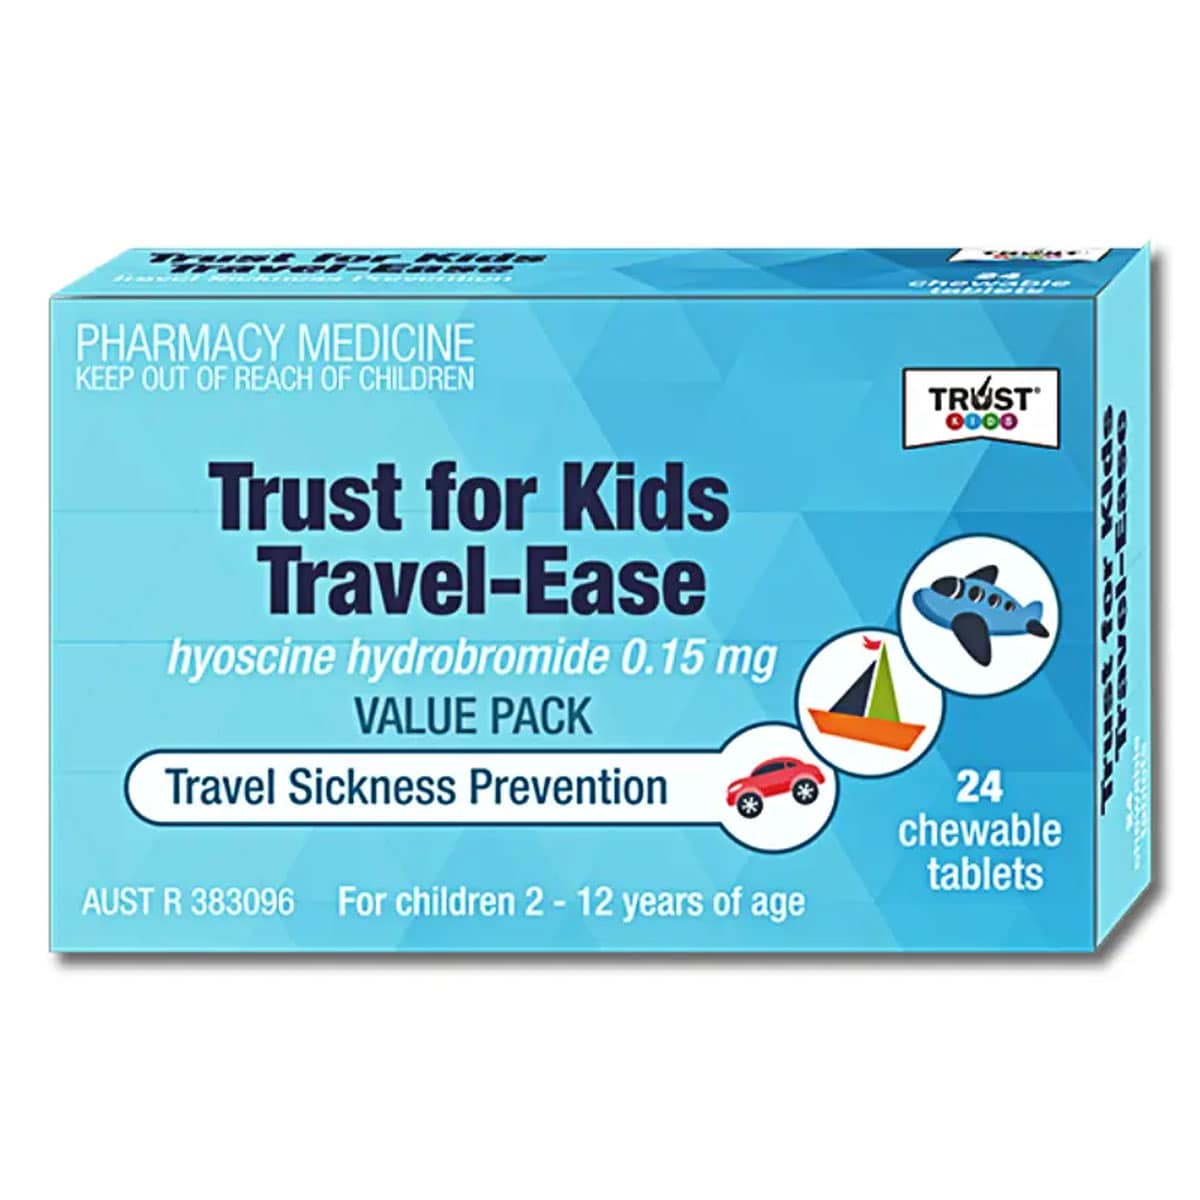 Trust for Kids Travel-Ease 24 Chewable Tablets